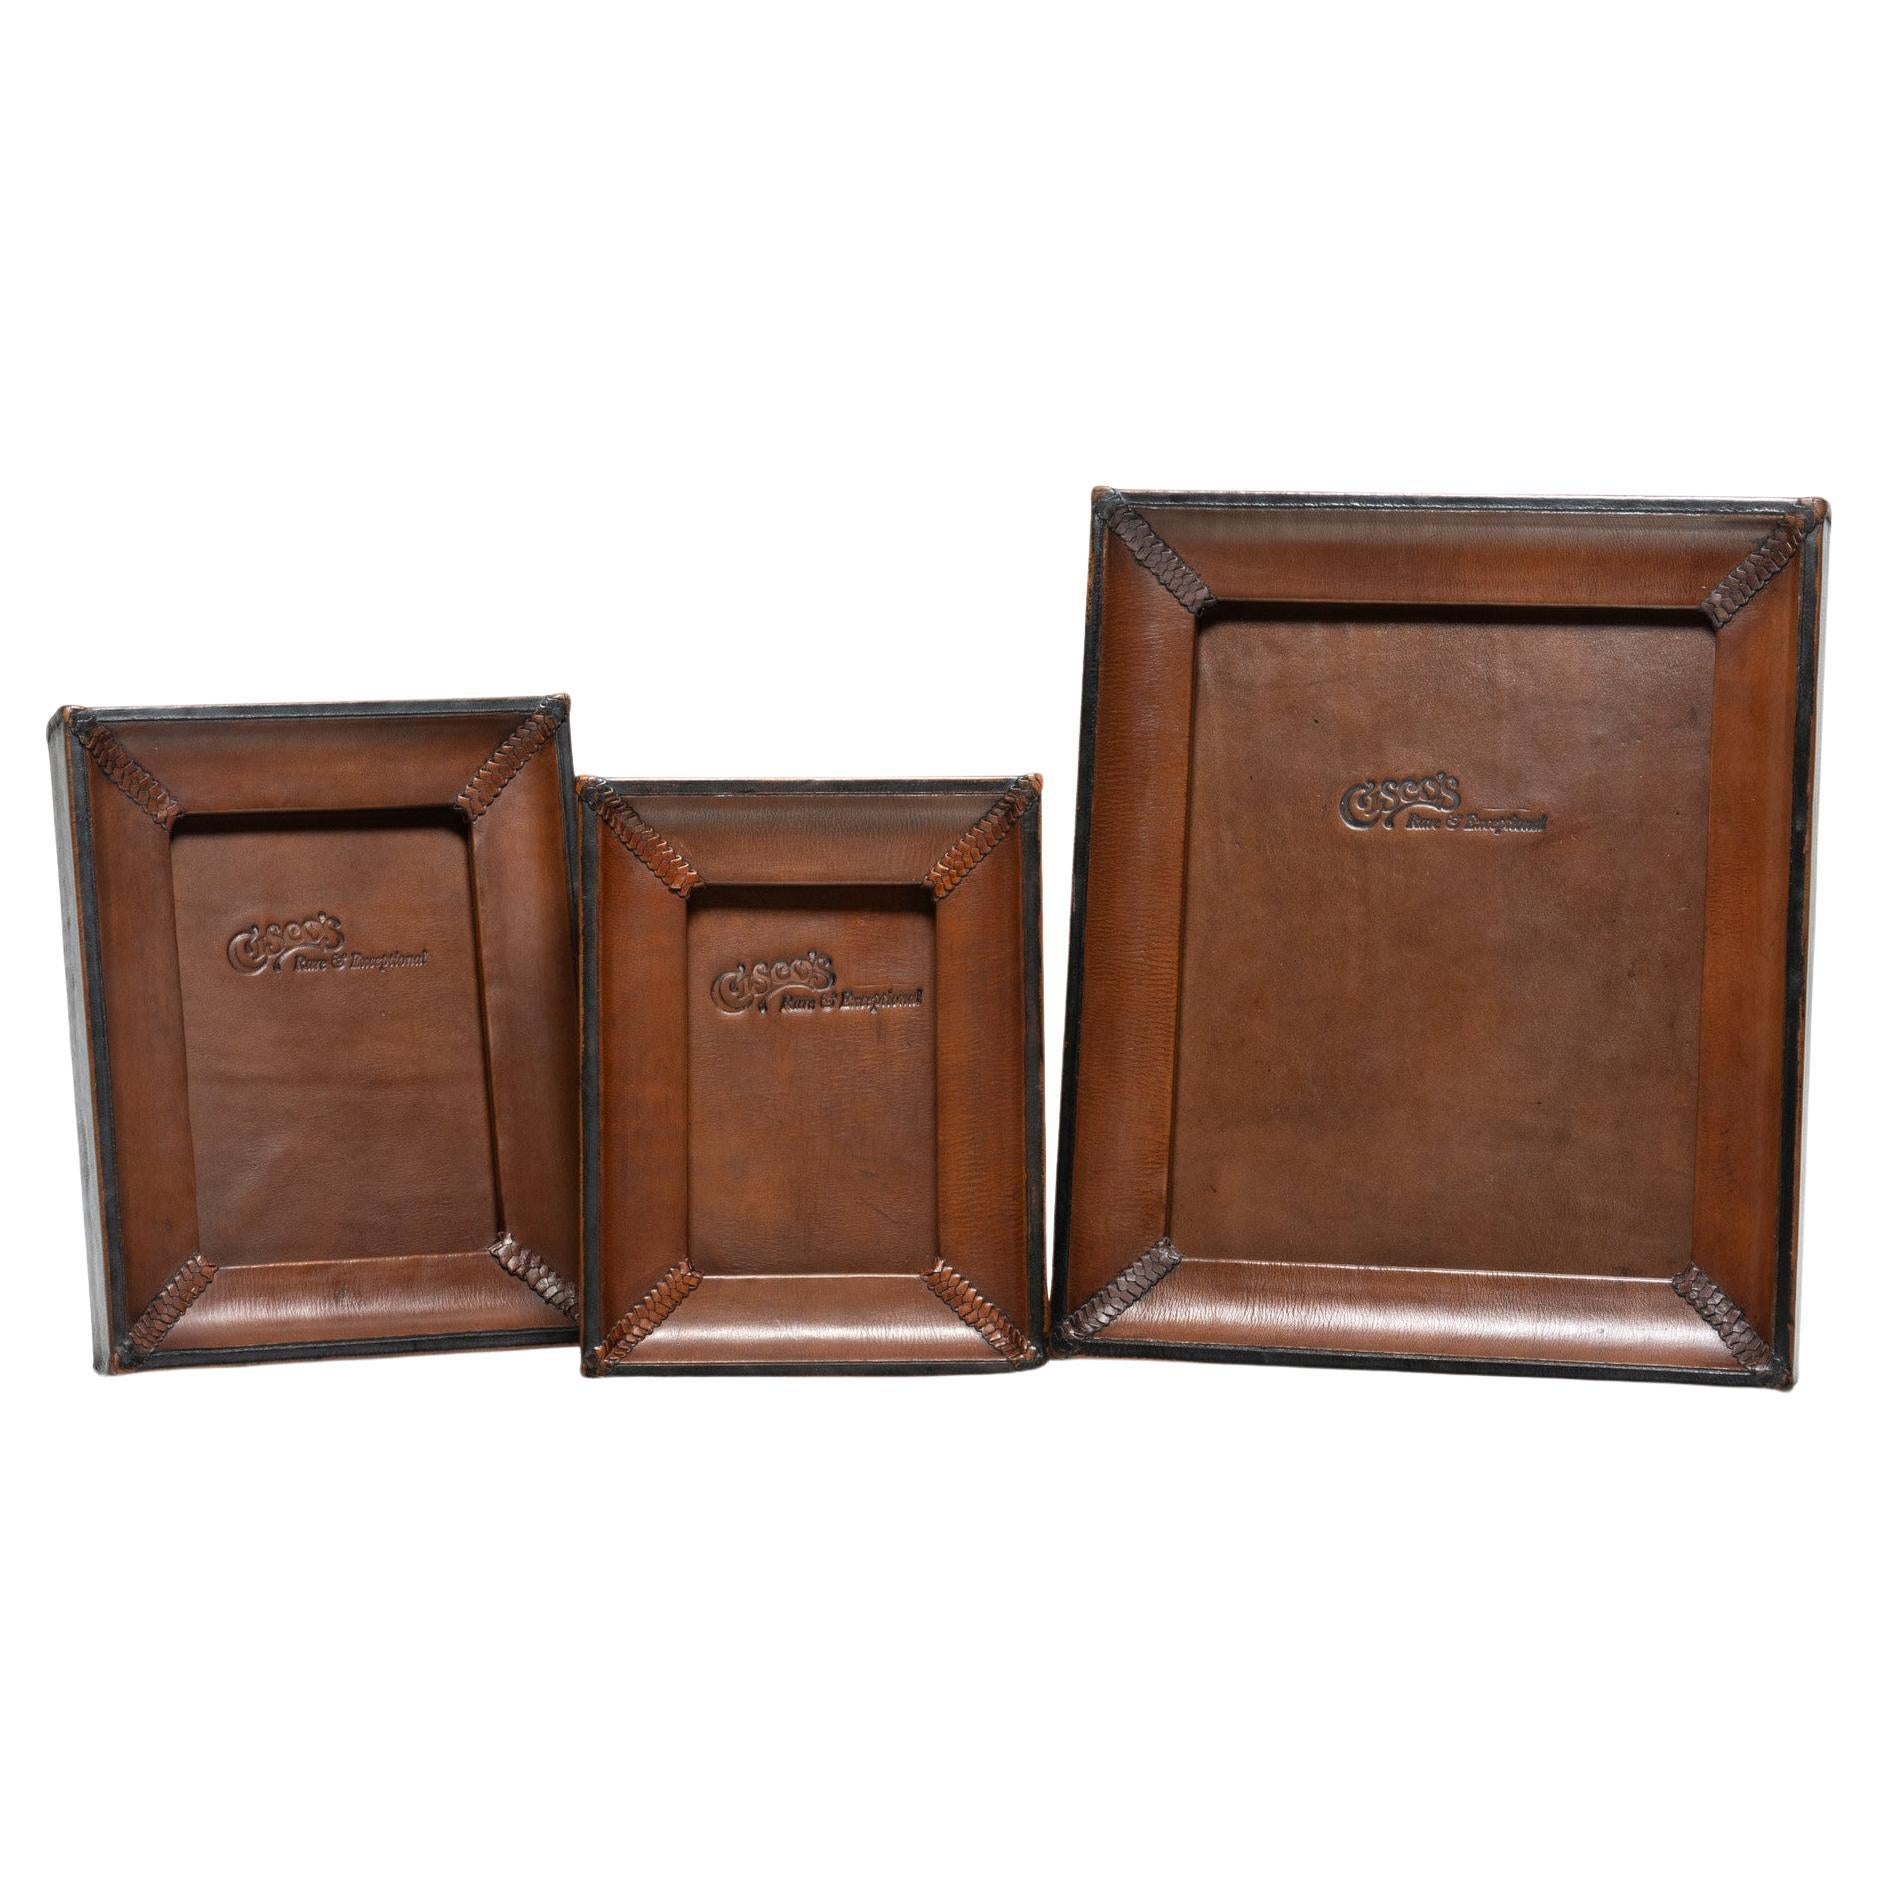 4x6 Medium Brown and Black Leather Tabletop Picture Frame - The Artisan For Sale